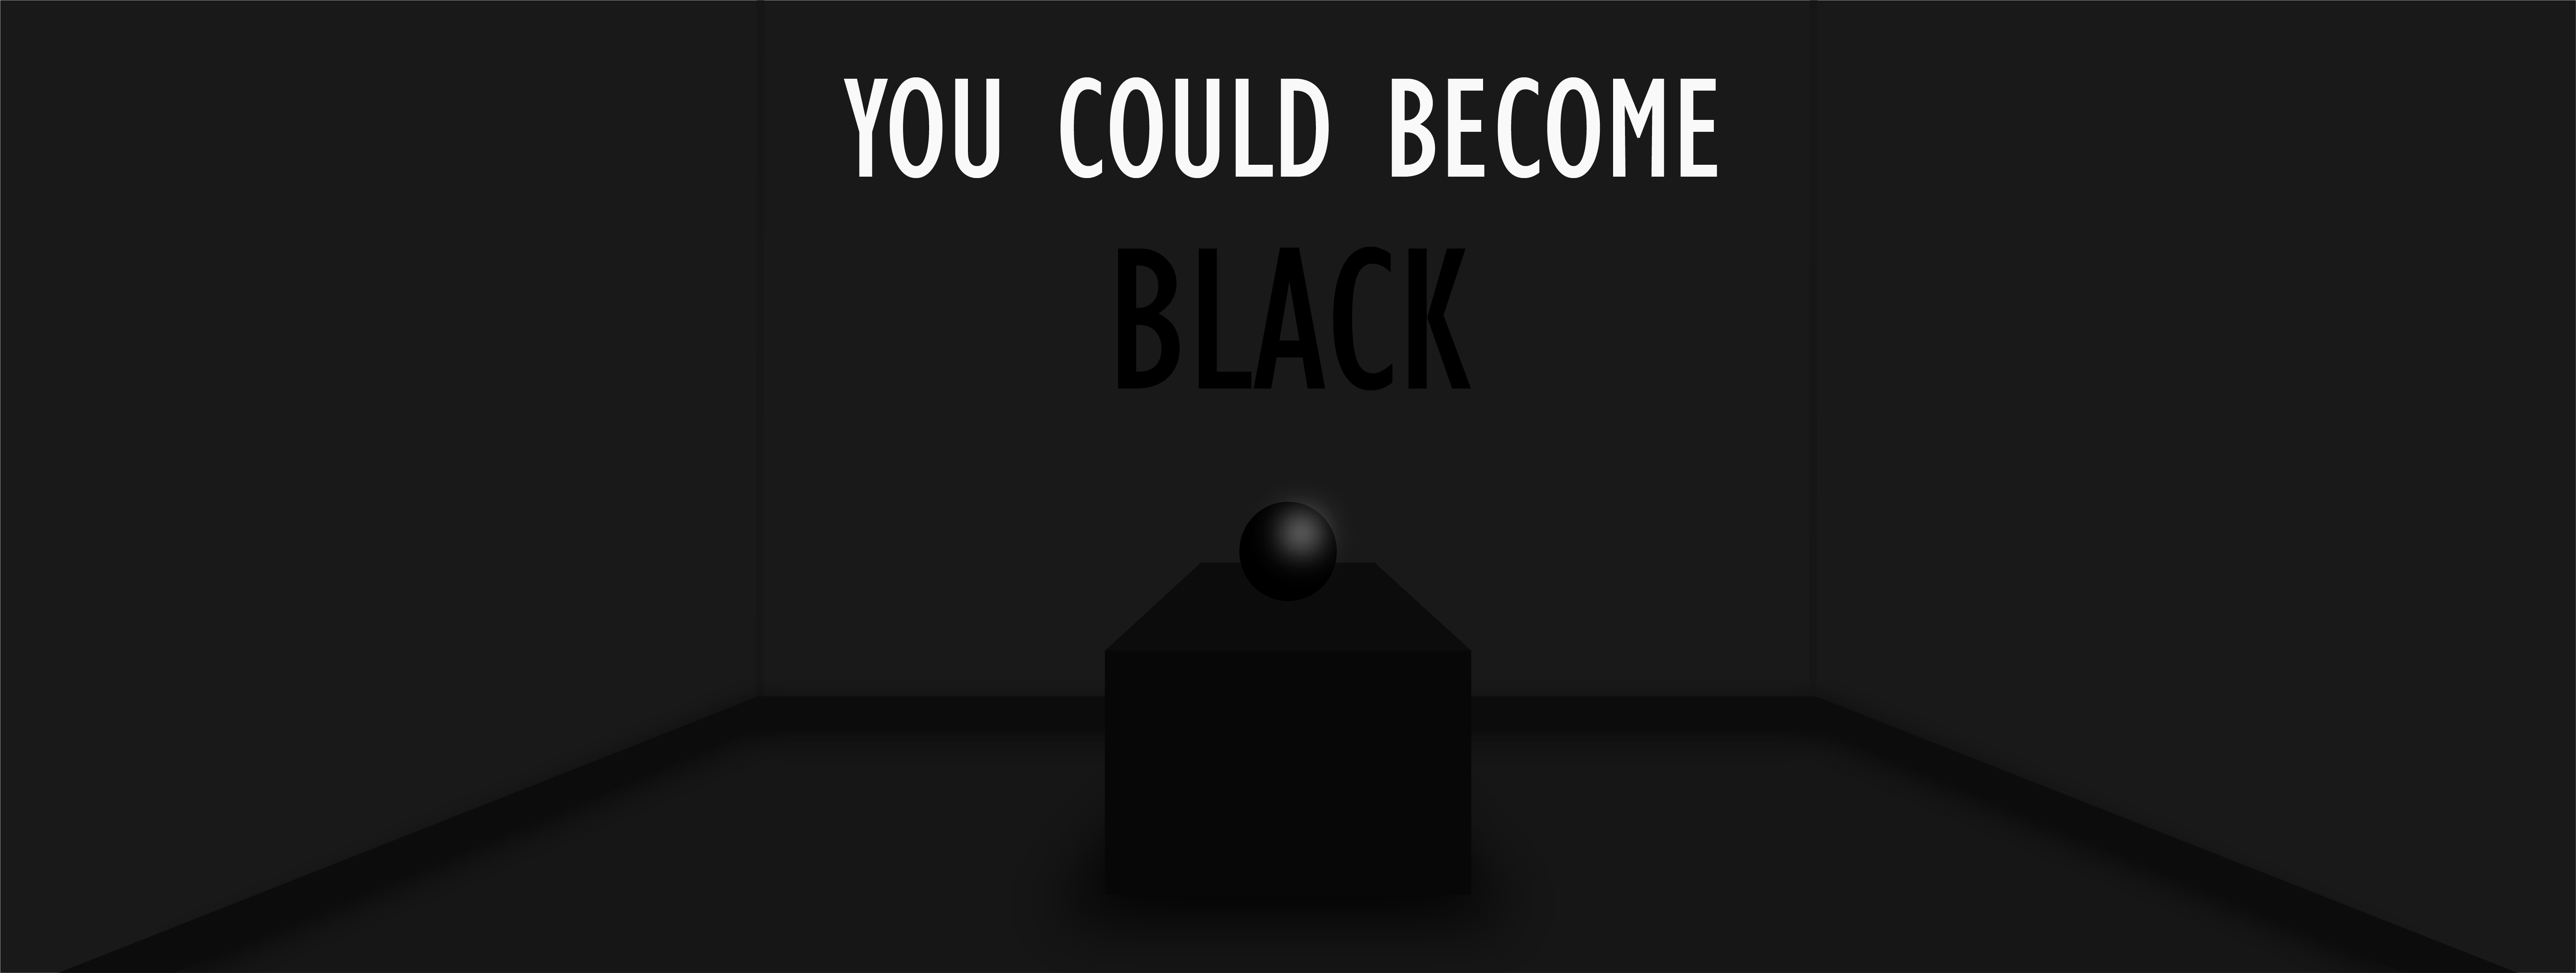 Black room. Text on wall reads 'YOU COULD BECOME BLACK’.